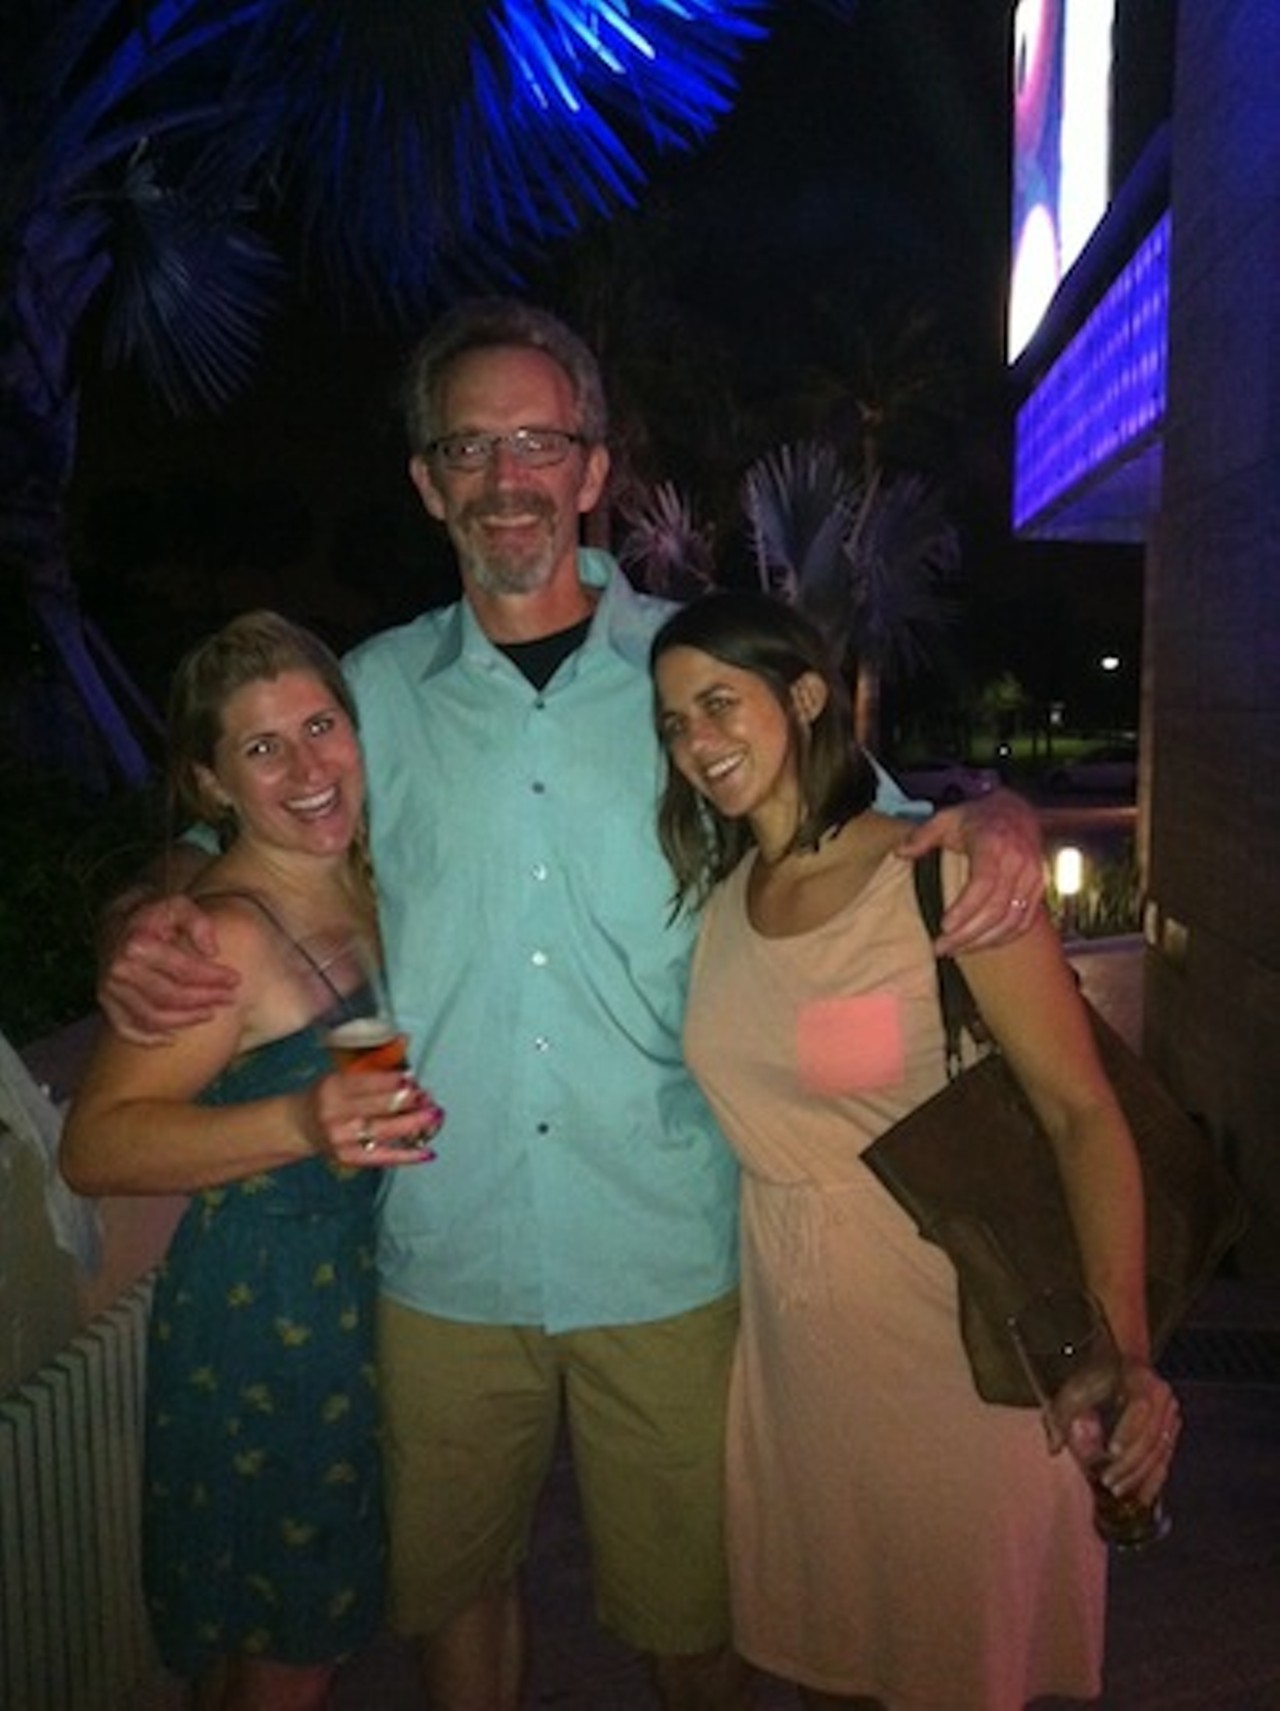 Hey, look, we (almost literally) stumbled into Bob Whitby, former editor of Orlando Weekly!